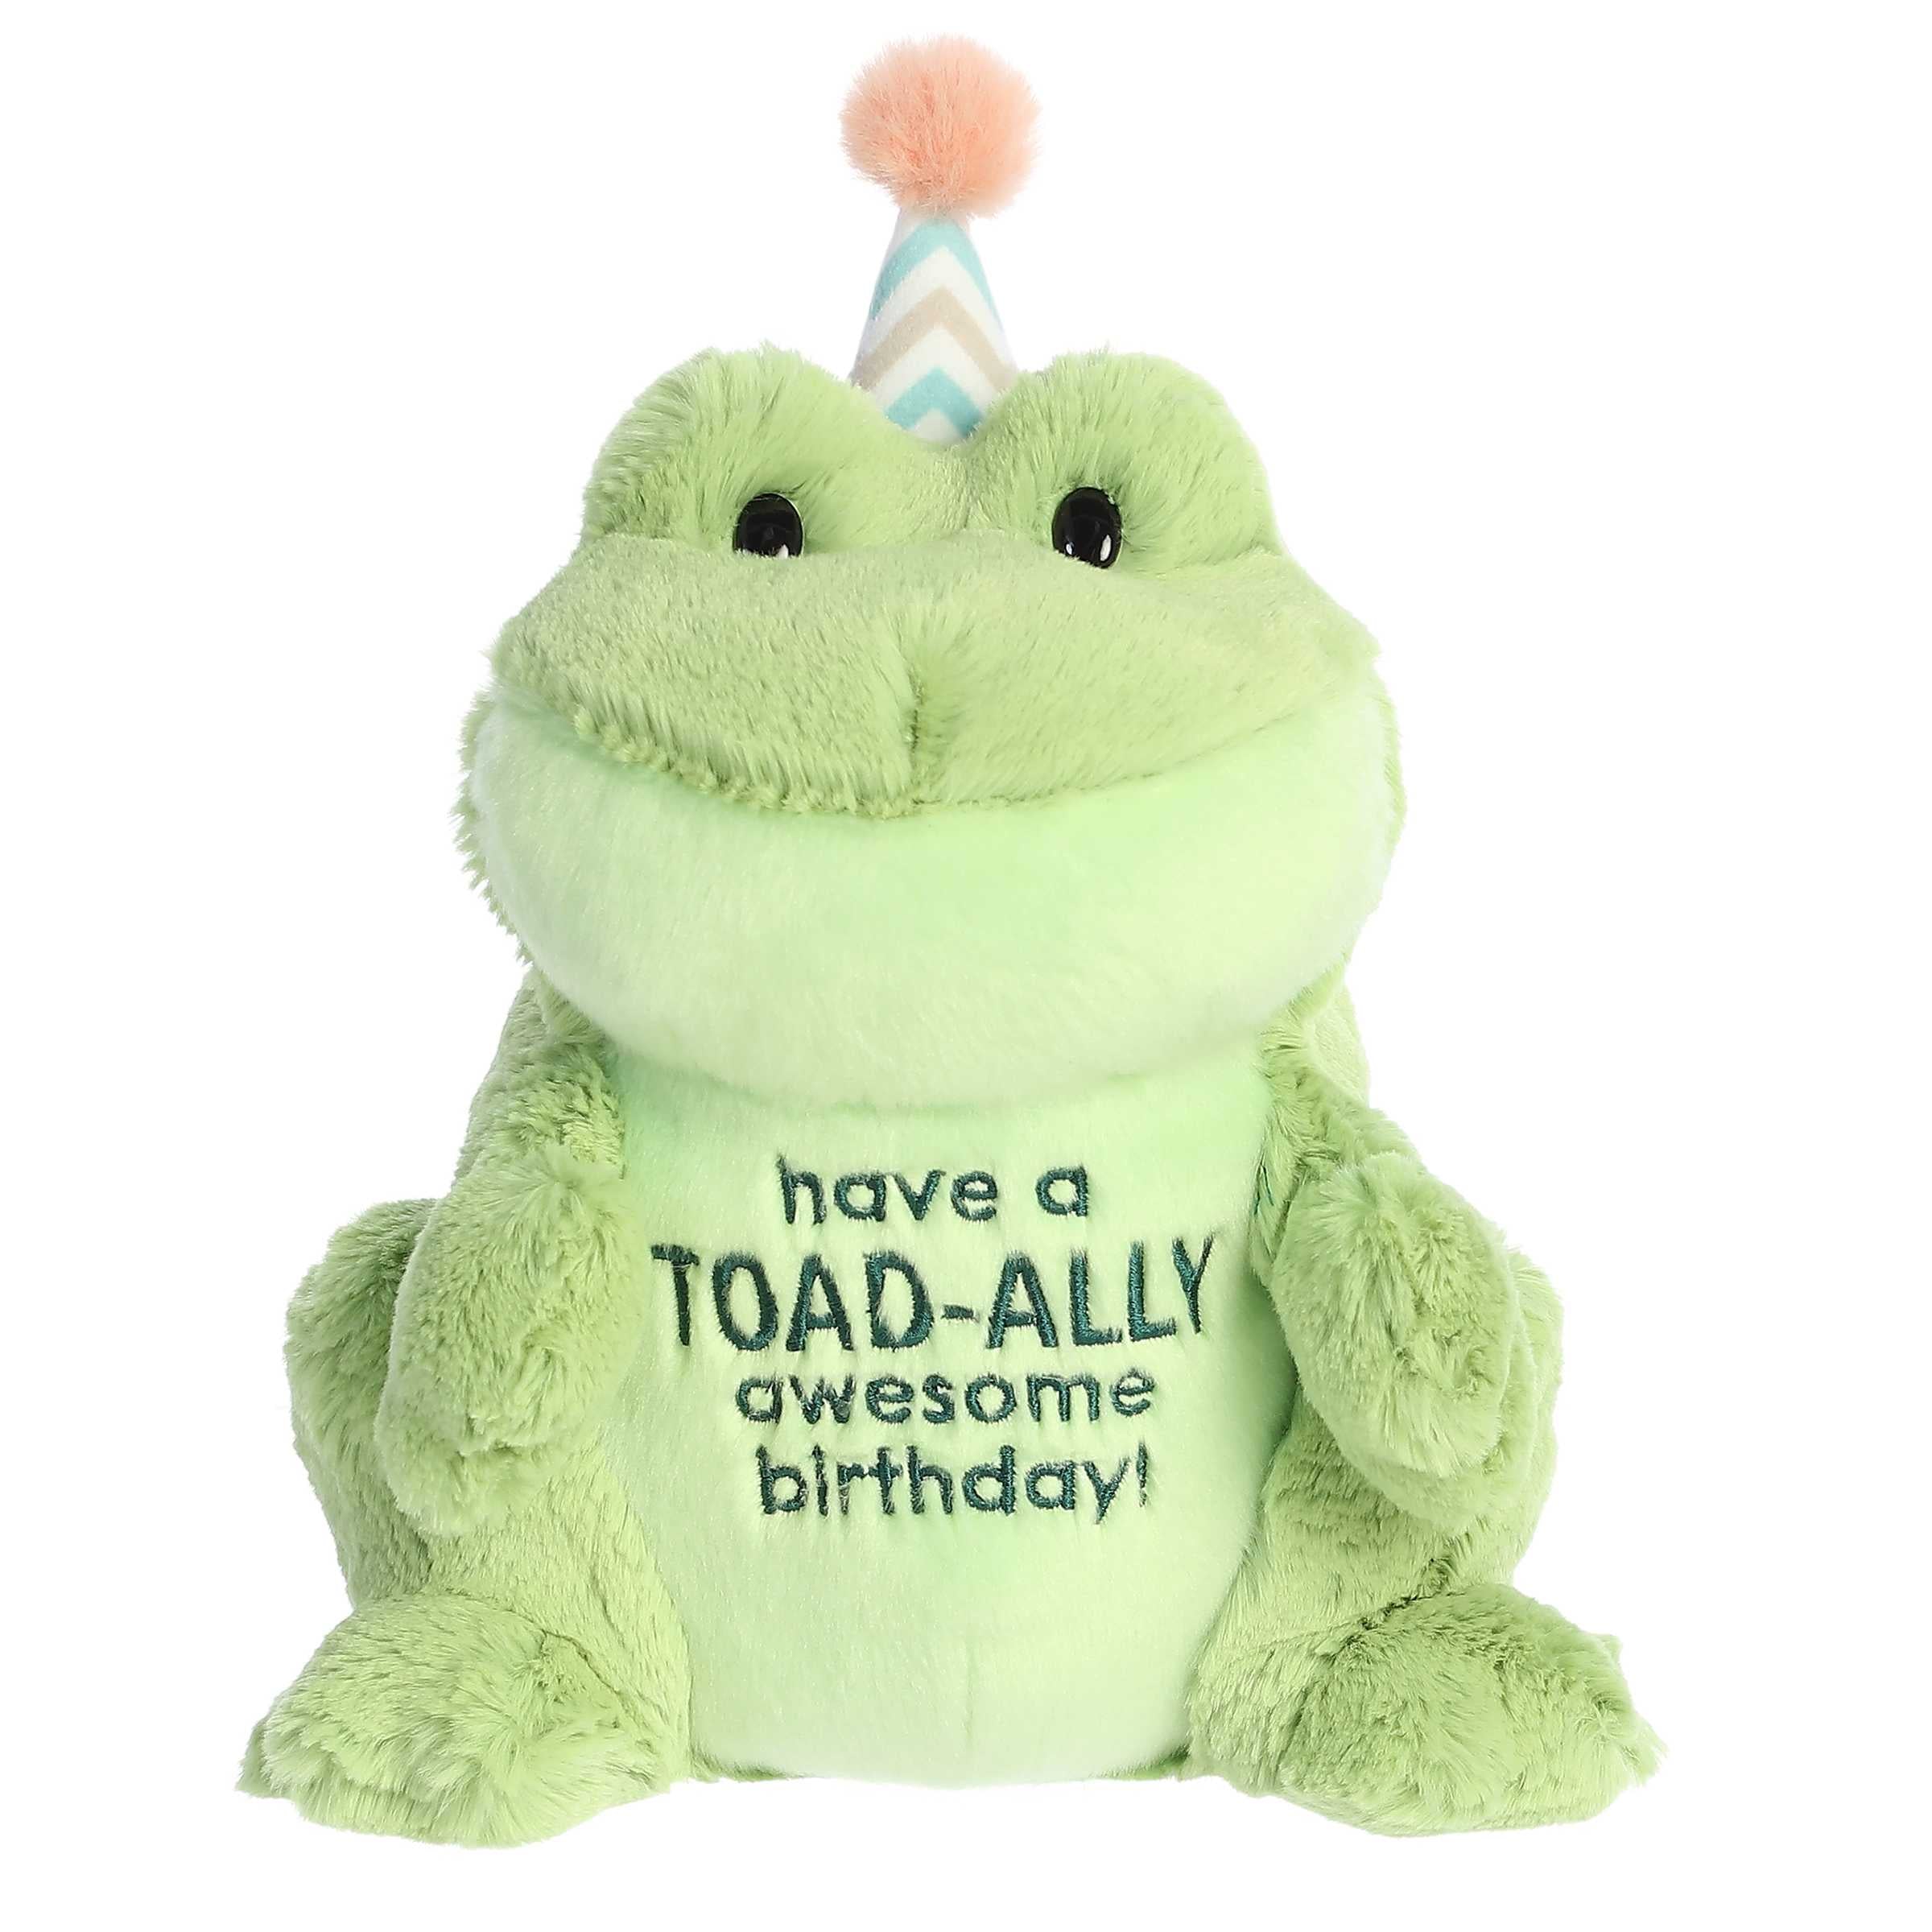 Aurora - Just Sayin' - 10 Toad-ally Awesome Birthday